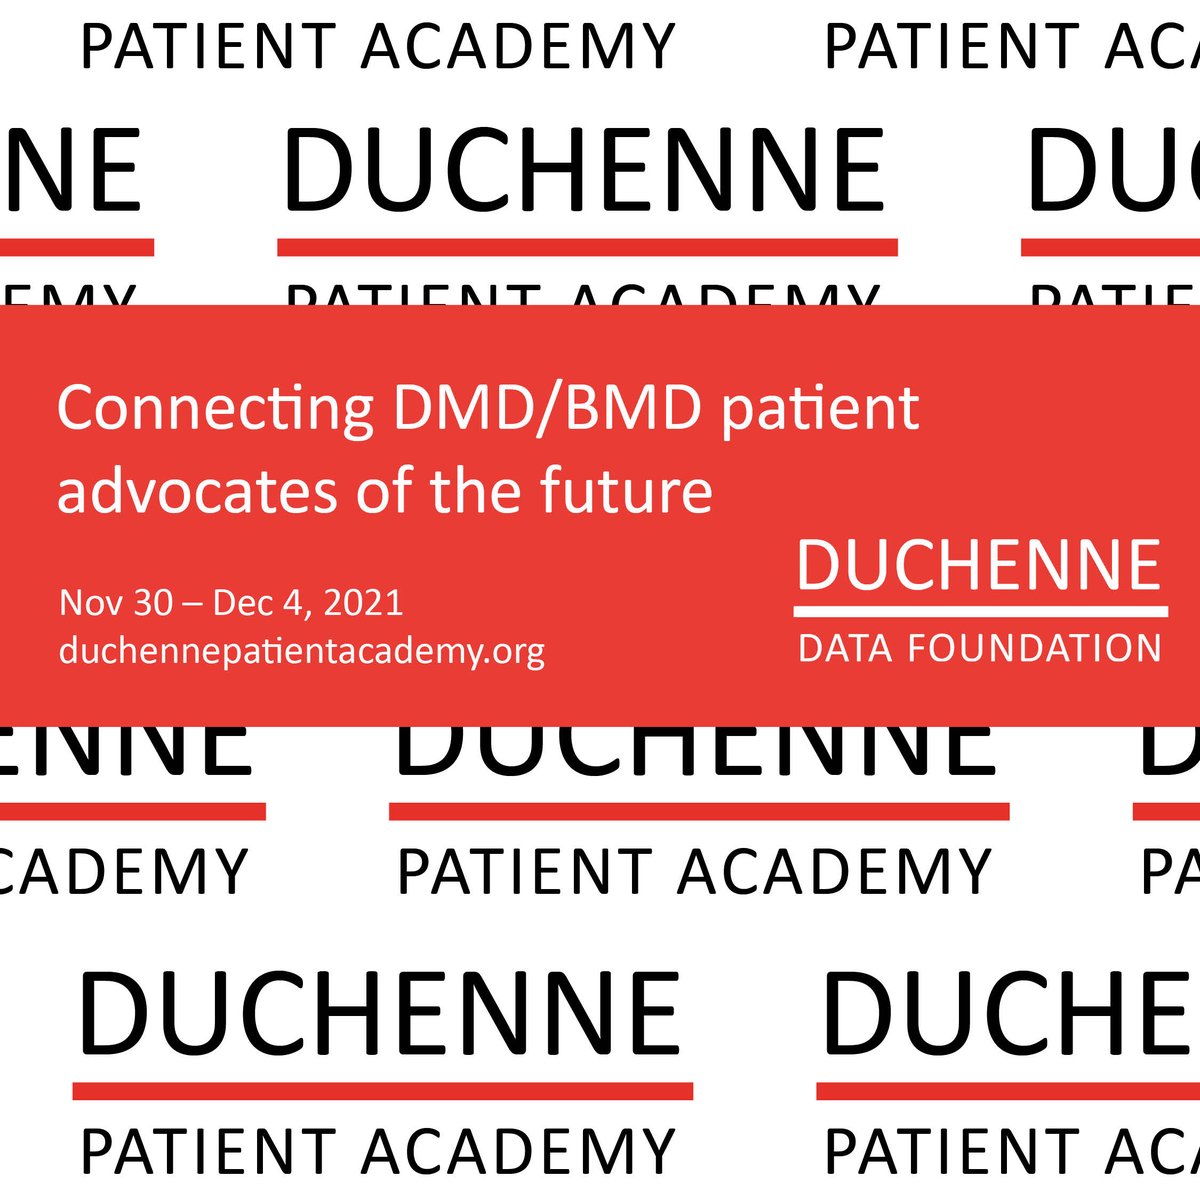 𝗔𝗣𝗣𝗟𝗜𝗖𝗔𝗧𝗜𝗢𝗡𝗦 𝗡𝗢𝗪 𝗢𝗣𝗘𝗡 Join the Duchenne Patient Academy, a 5-day intensive training to build a strong base for current and future global advocacy. #DPA2021 👇 Apply today! duchennedatafoundation.org/applications-o…